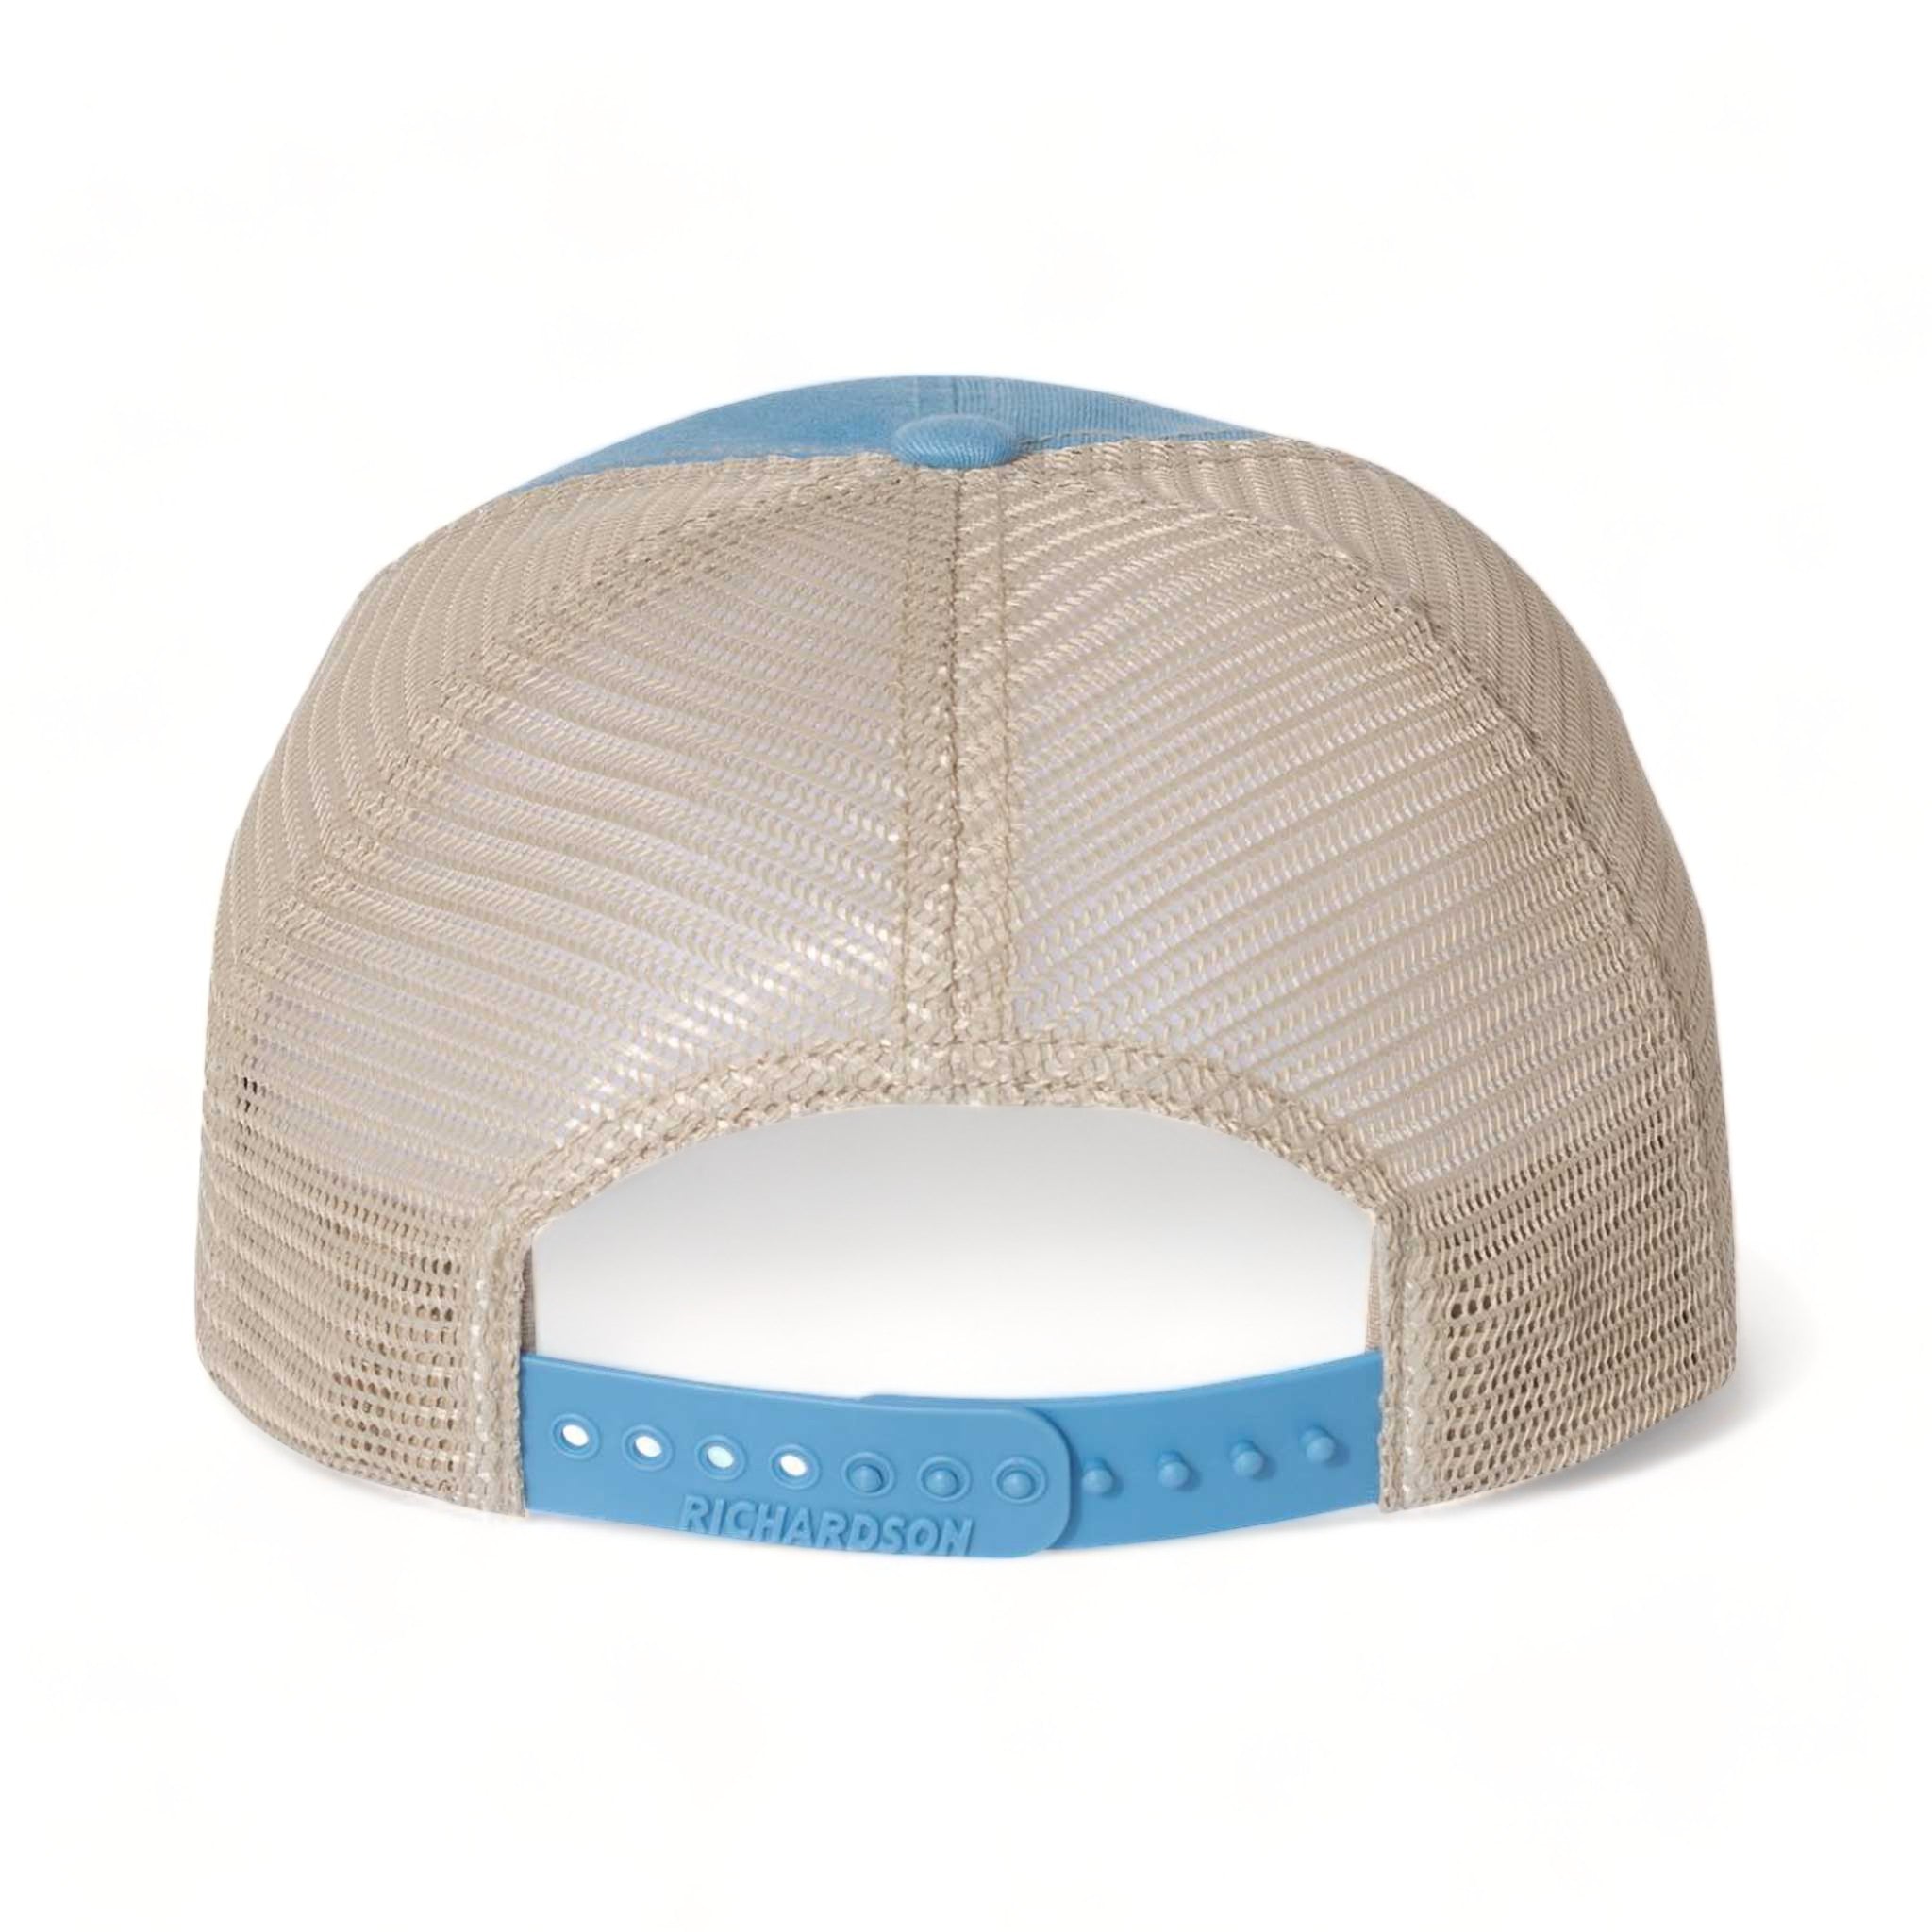 Back view of Richardson 111 custom hat in columbia blue and khaki